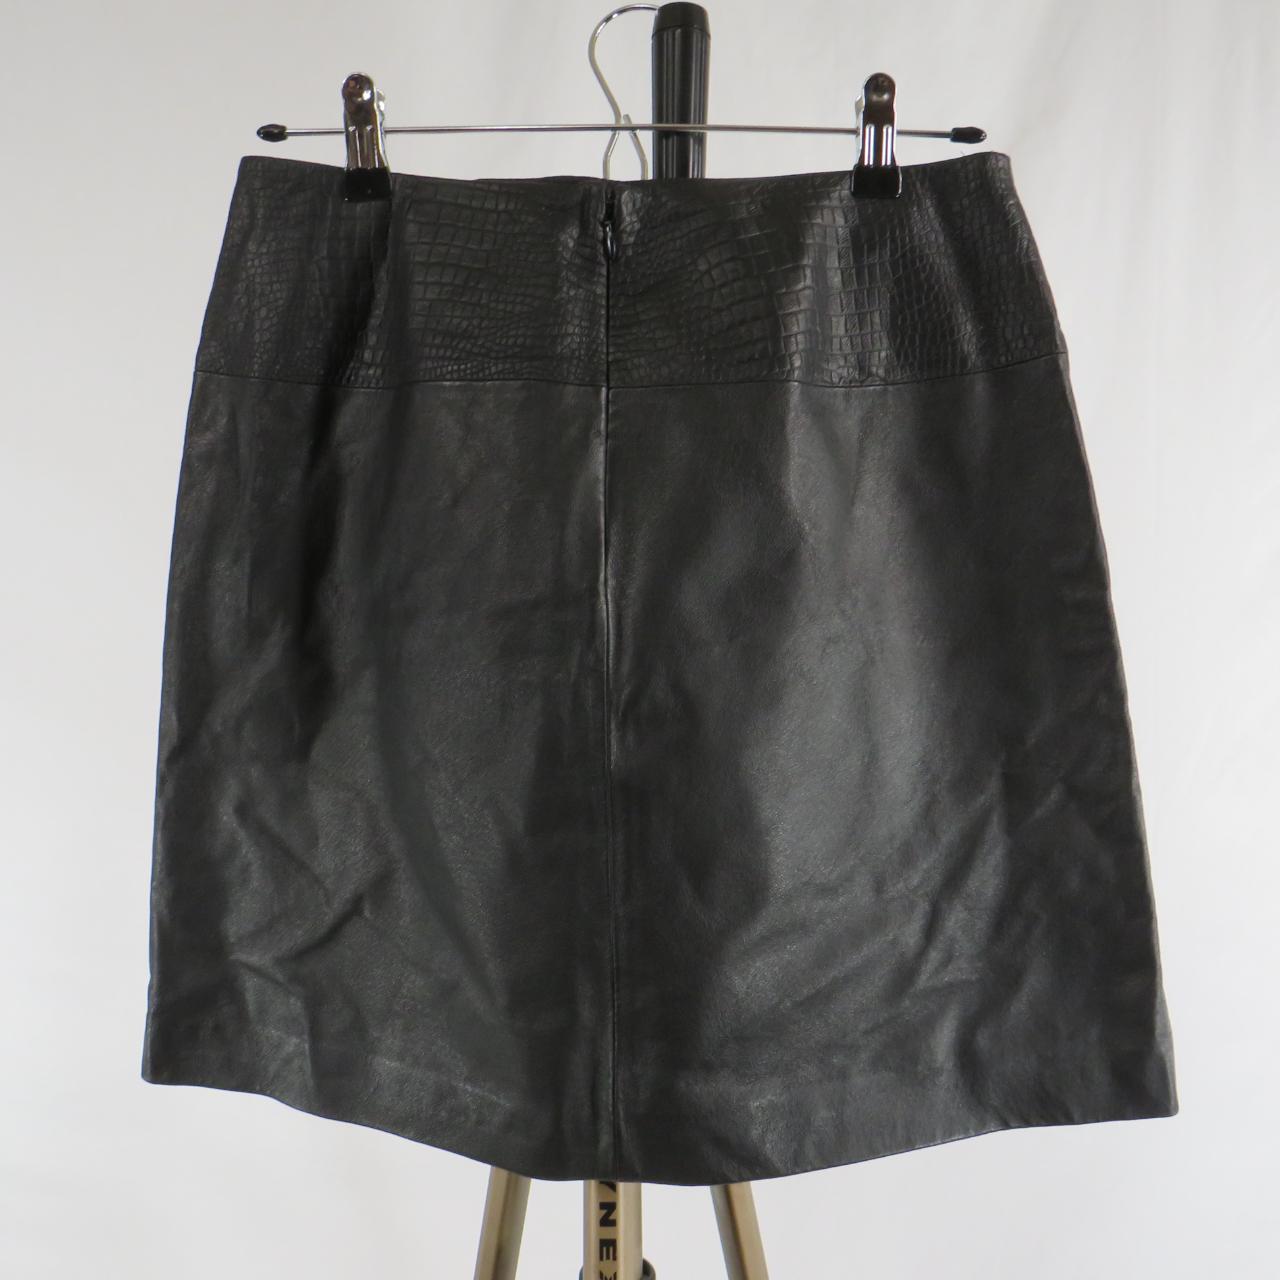 Apostrophe black real leather skirt with back... - Depop